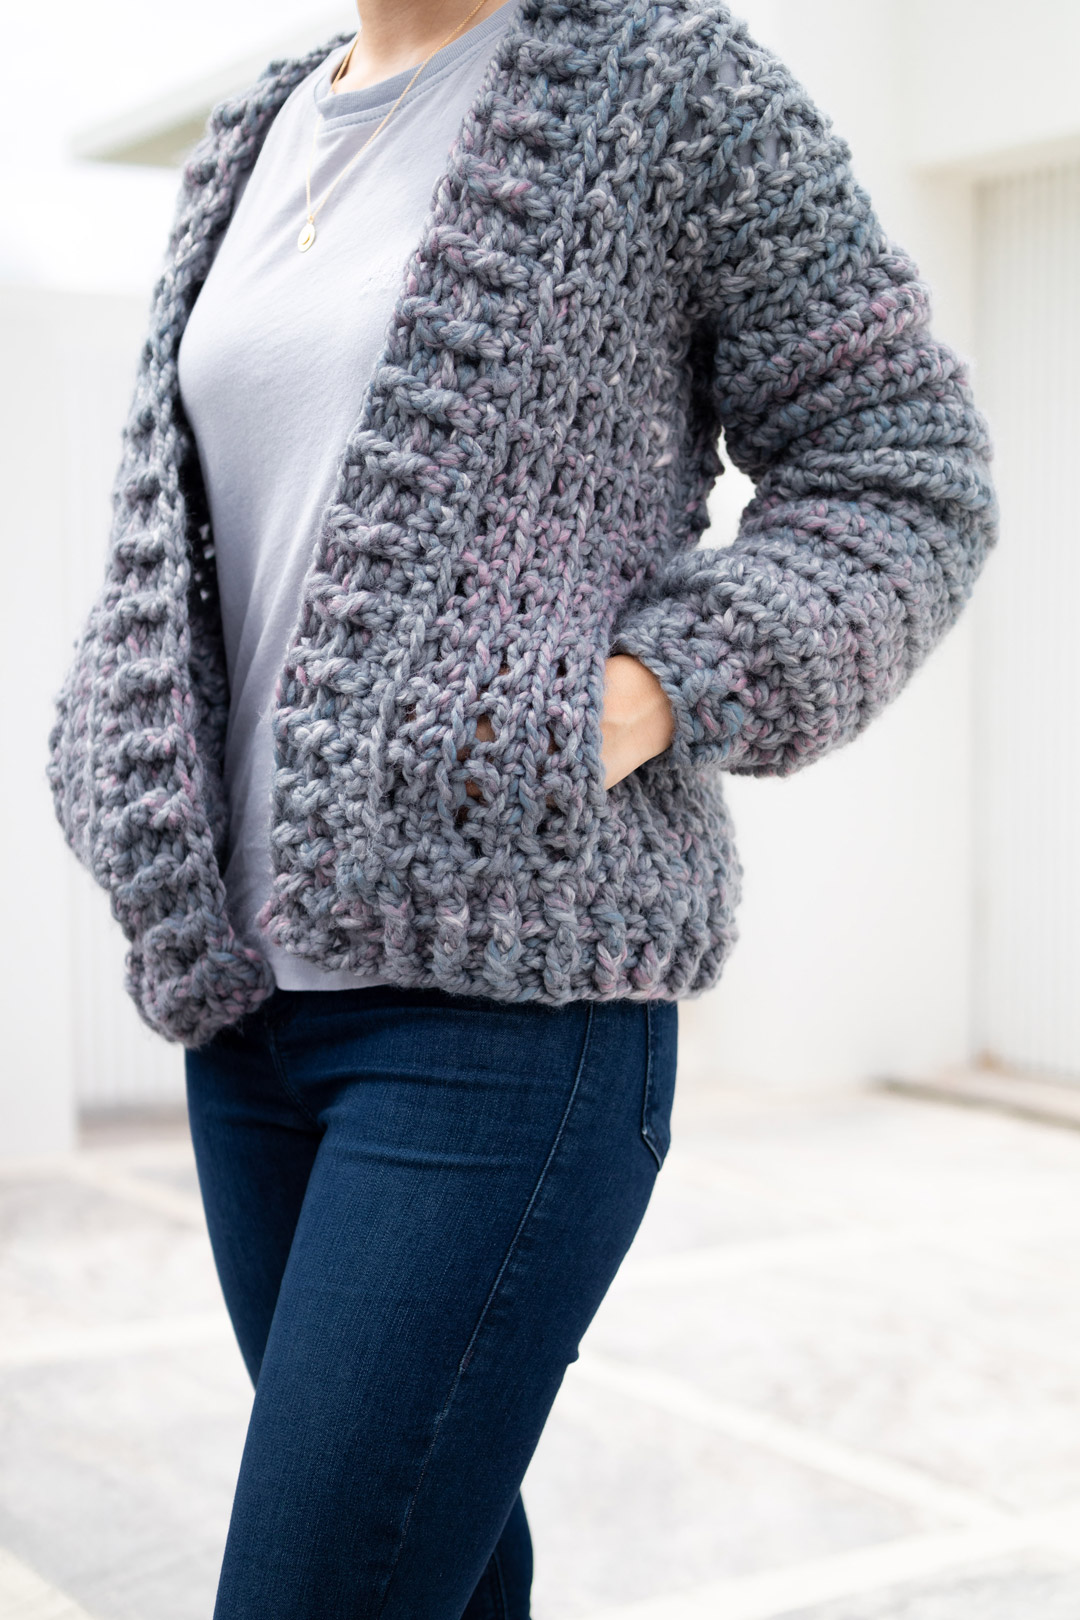 Chunky Crochet Bomber Cardigan with Pockets! Free Pattern + Video